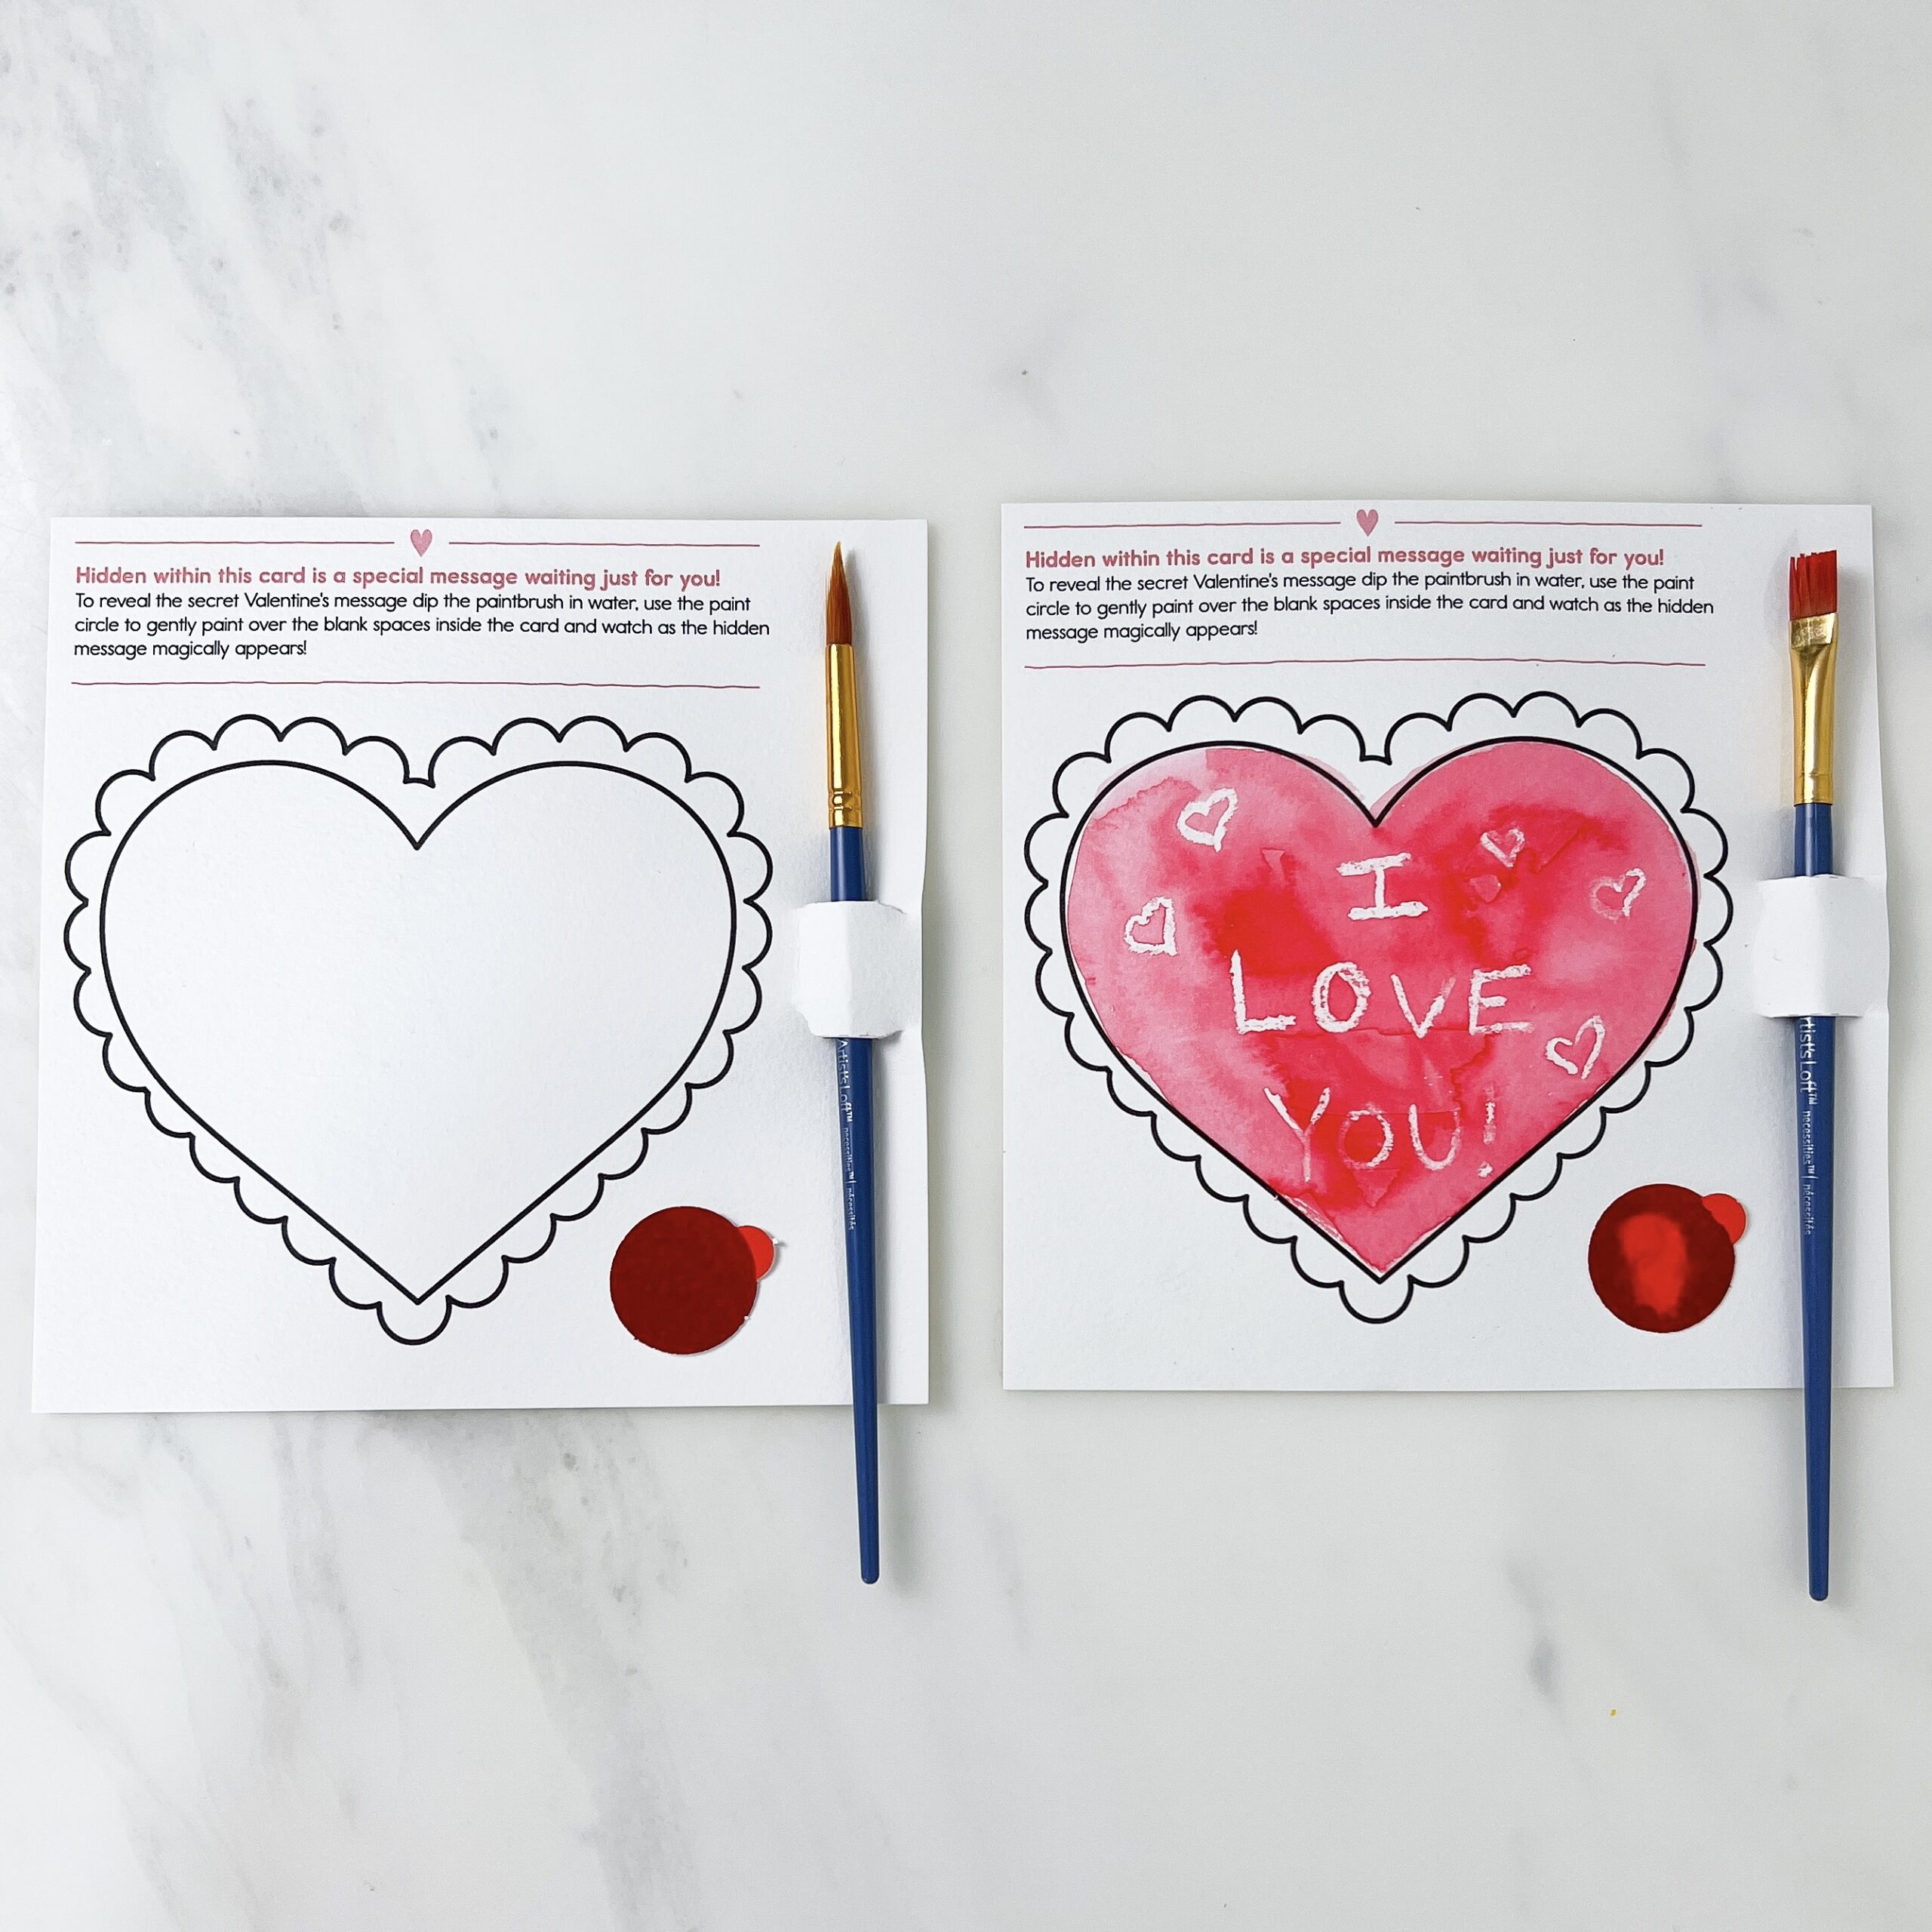 Make Your Own Valentine’s Day Card with a Secret Love Message